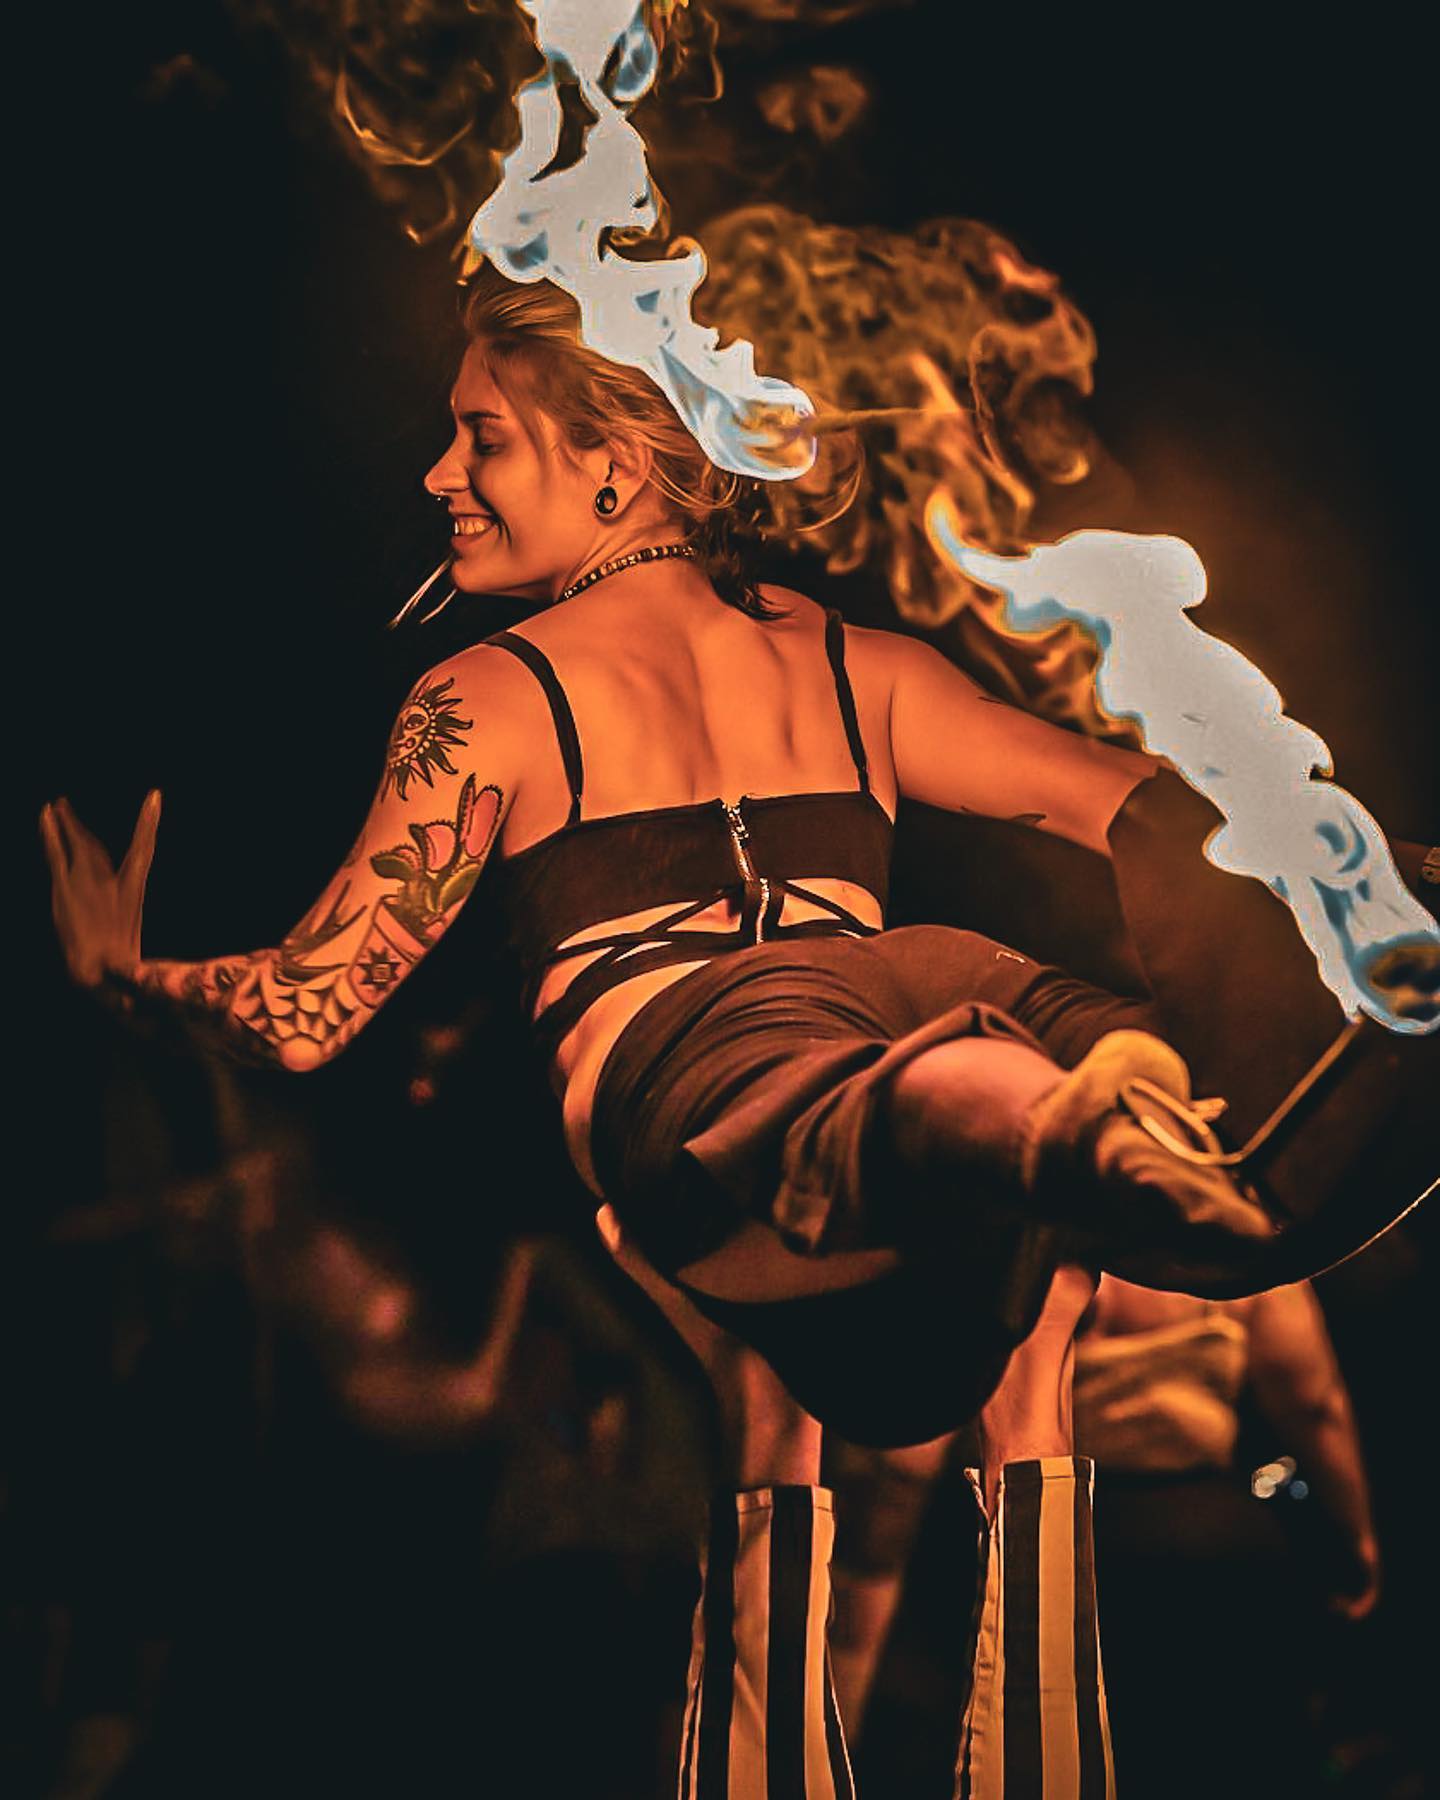 let it flow 🔥

#fireperformer #acroyoga #fireacro #circusarts #circus